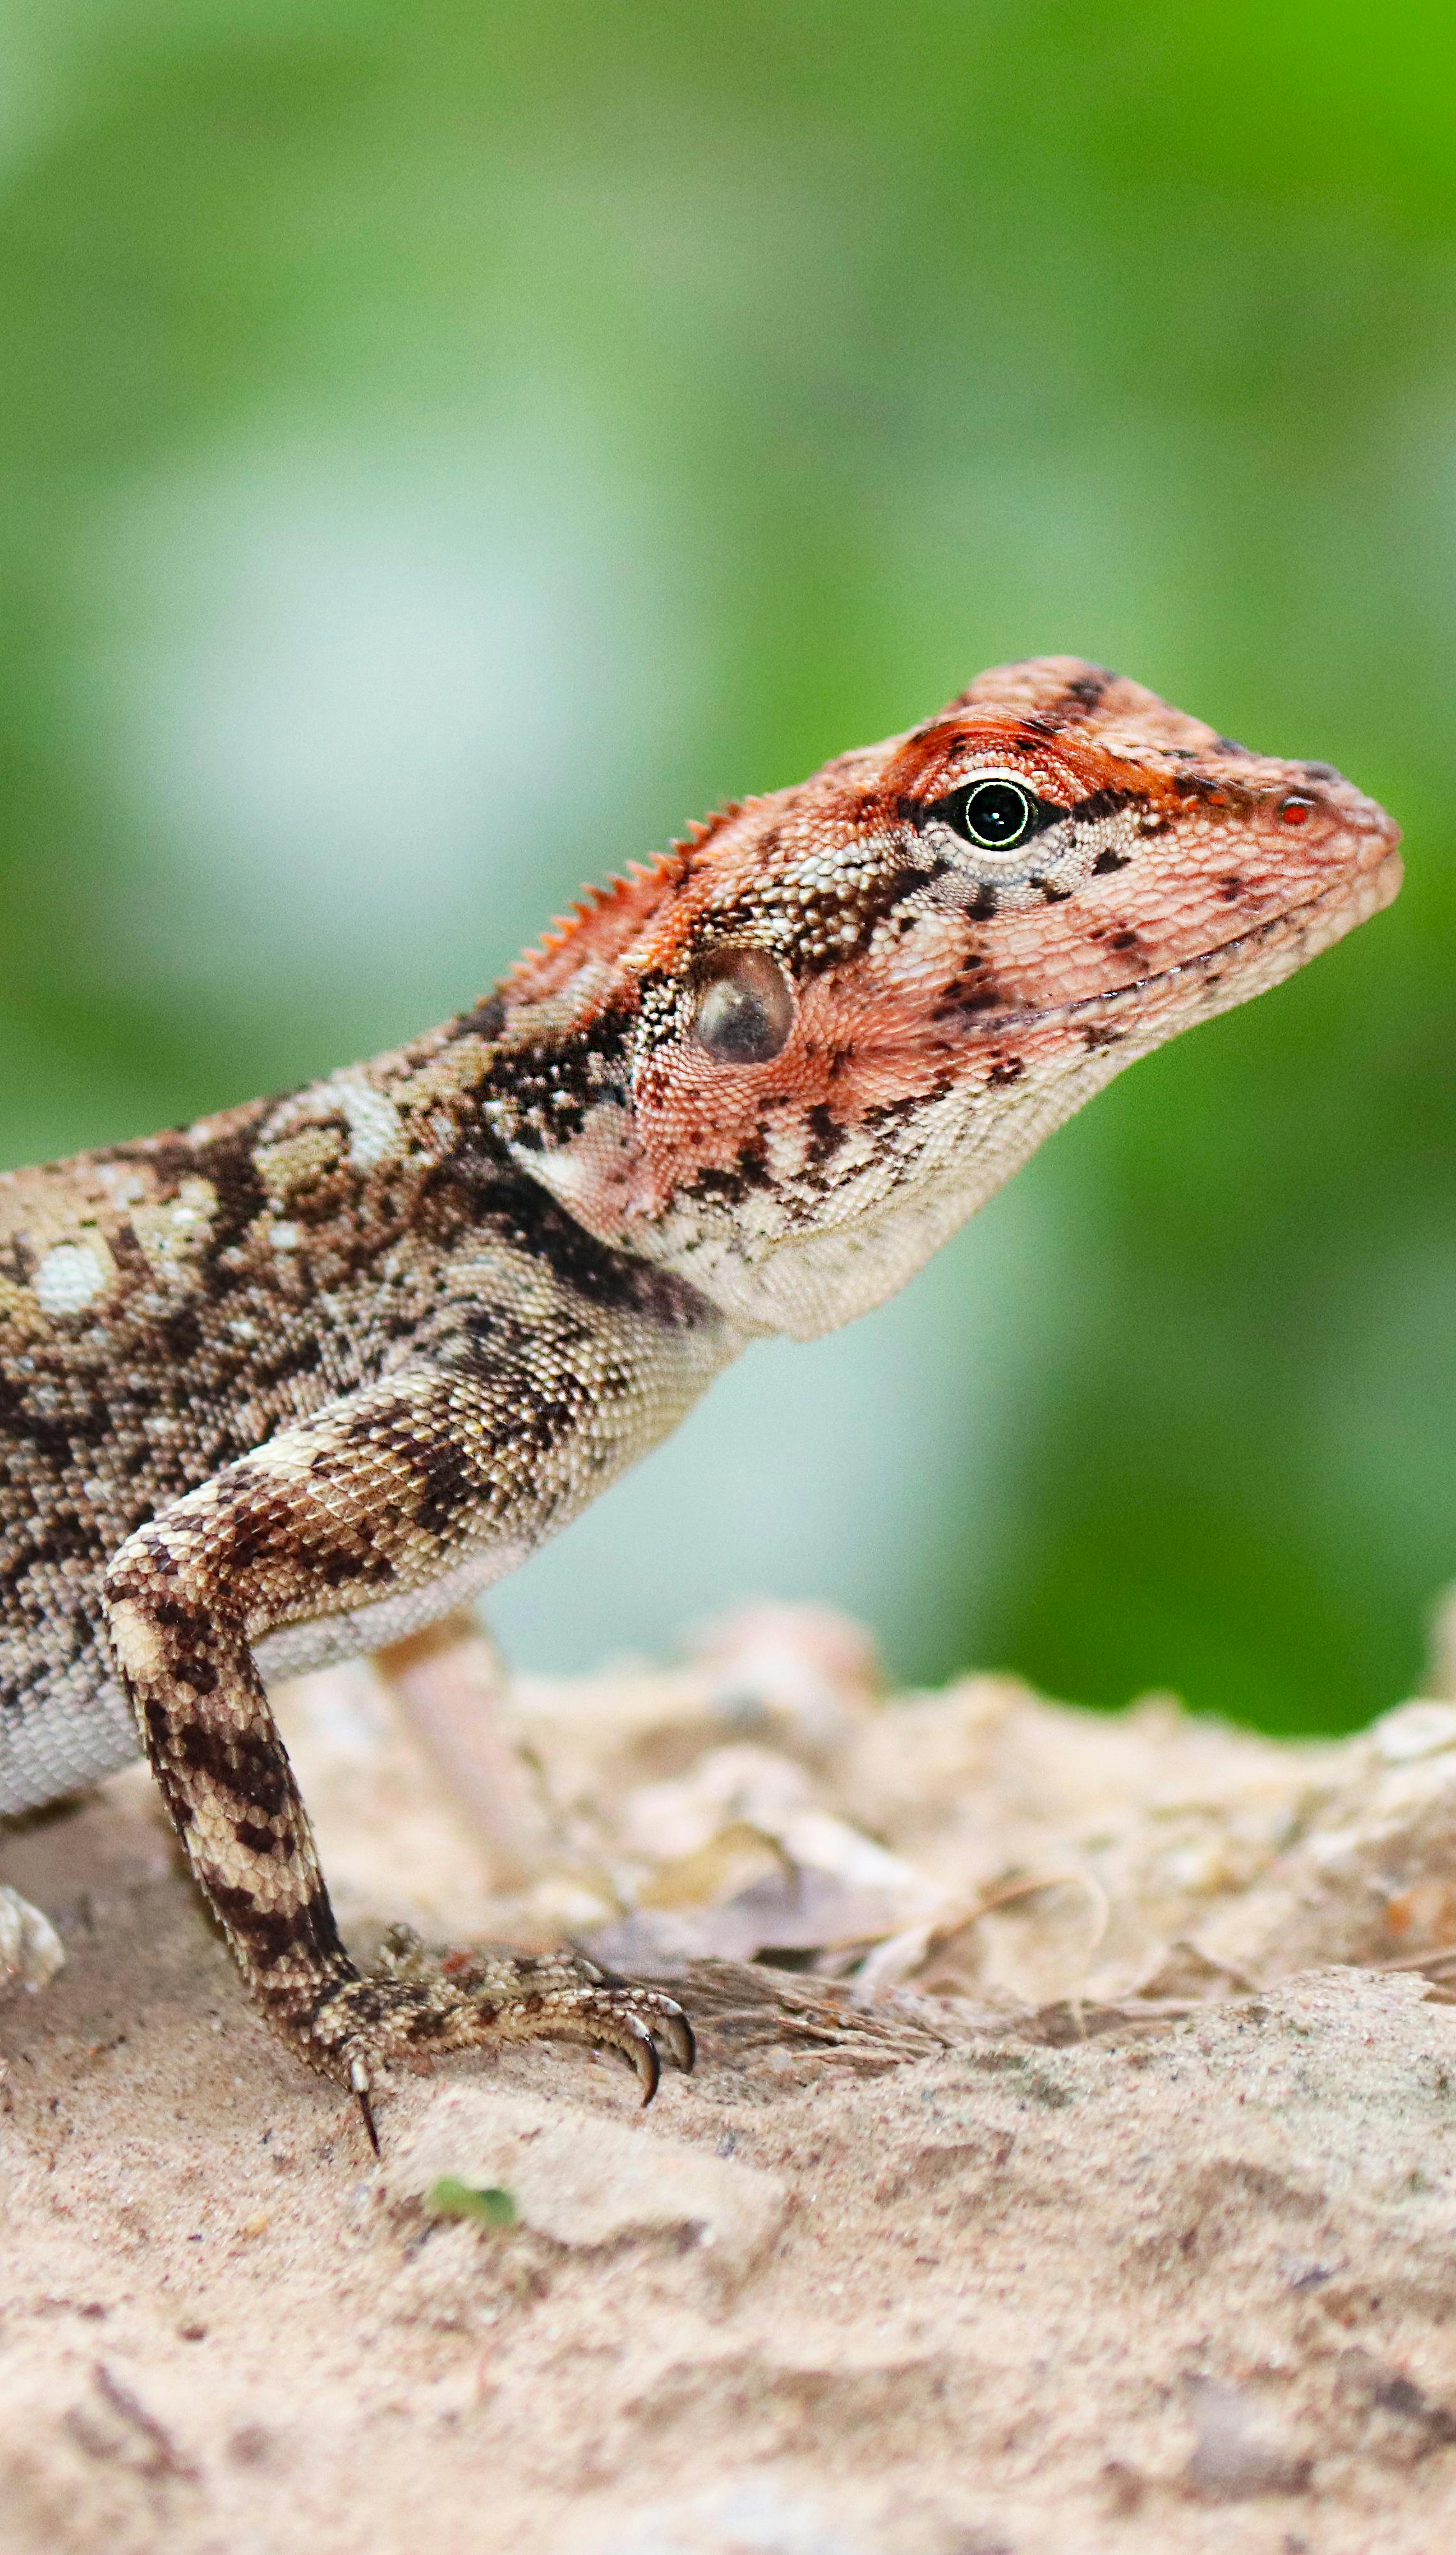 Brown and White Lizard on the Brown Rock · Free Stock Photo